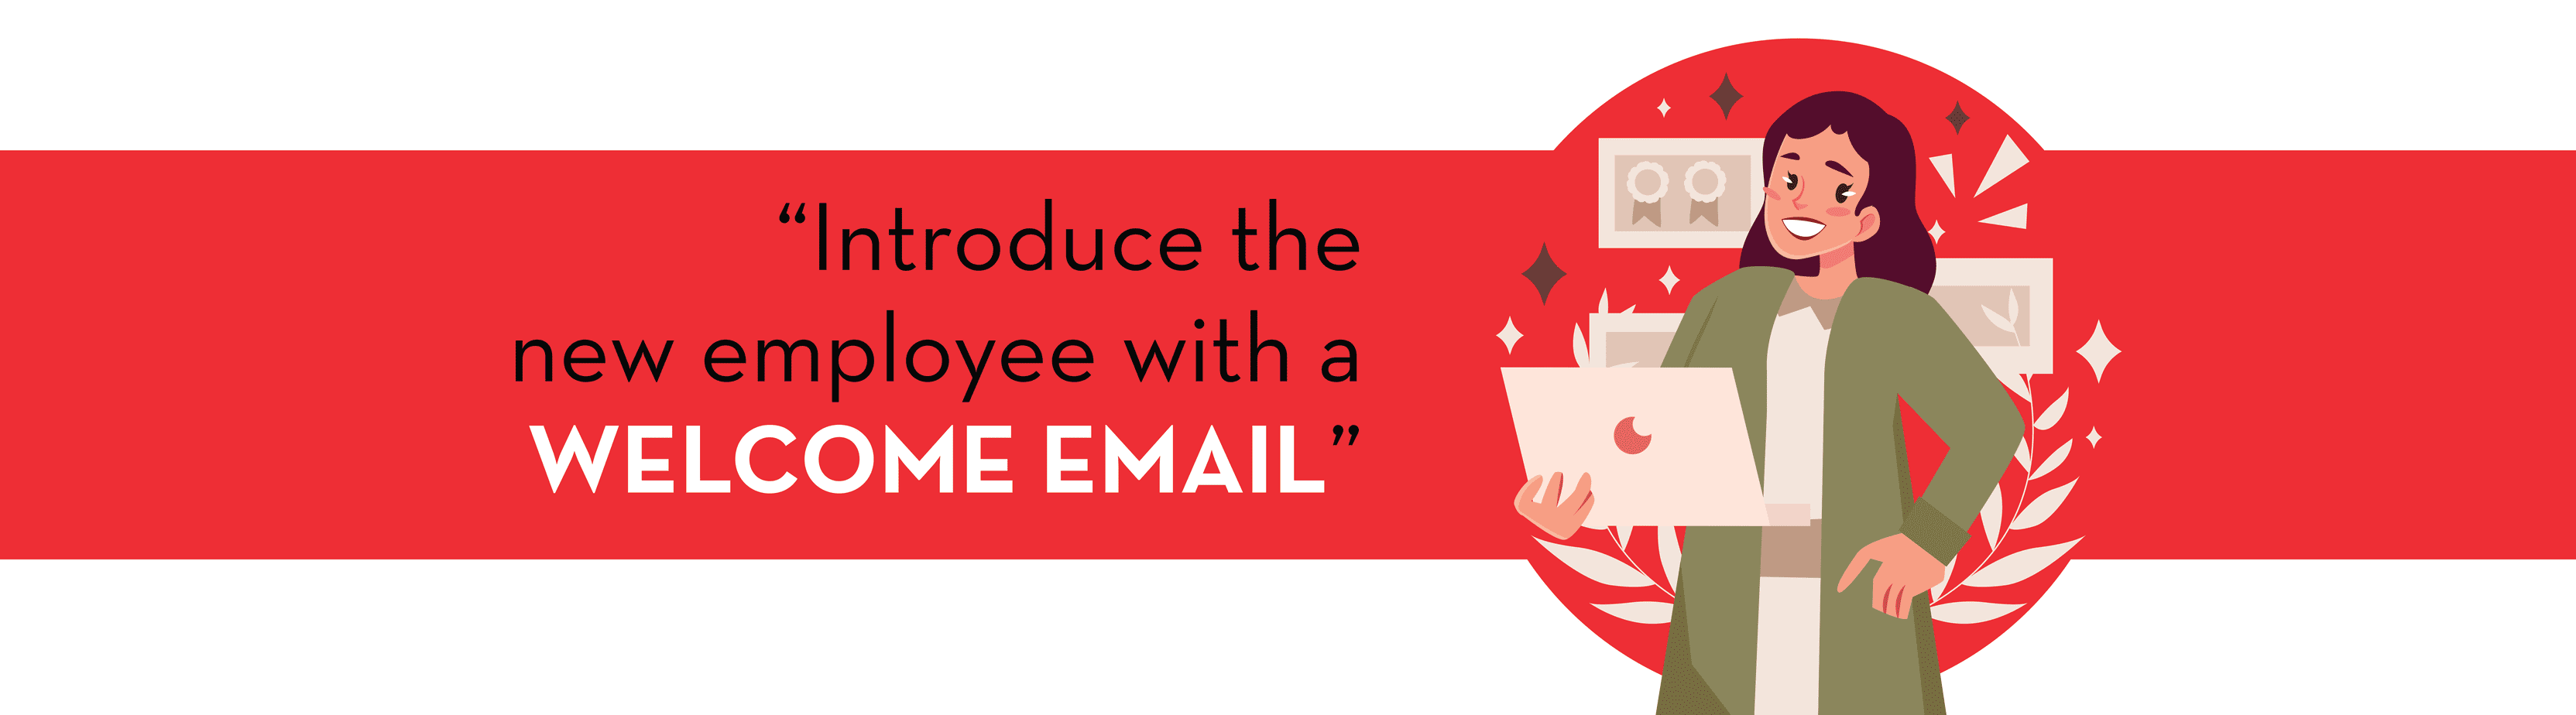 Introduce the new employee with a welcome email